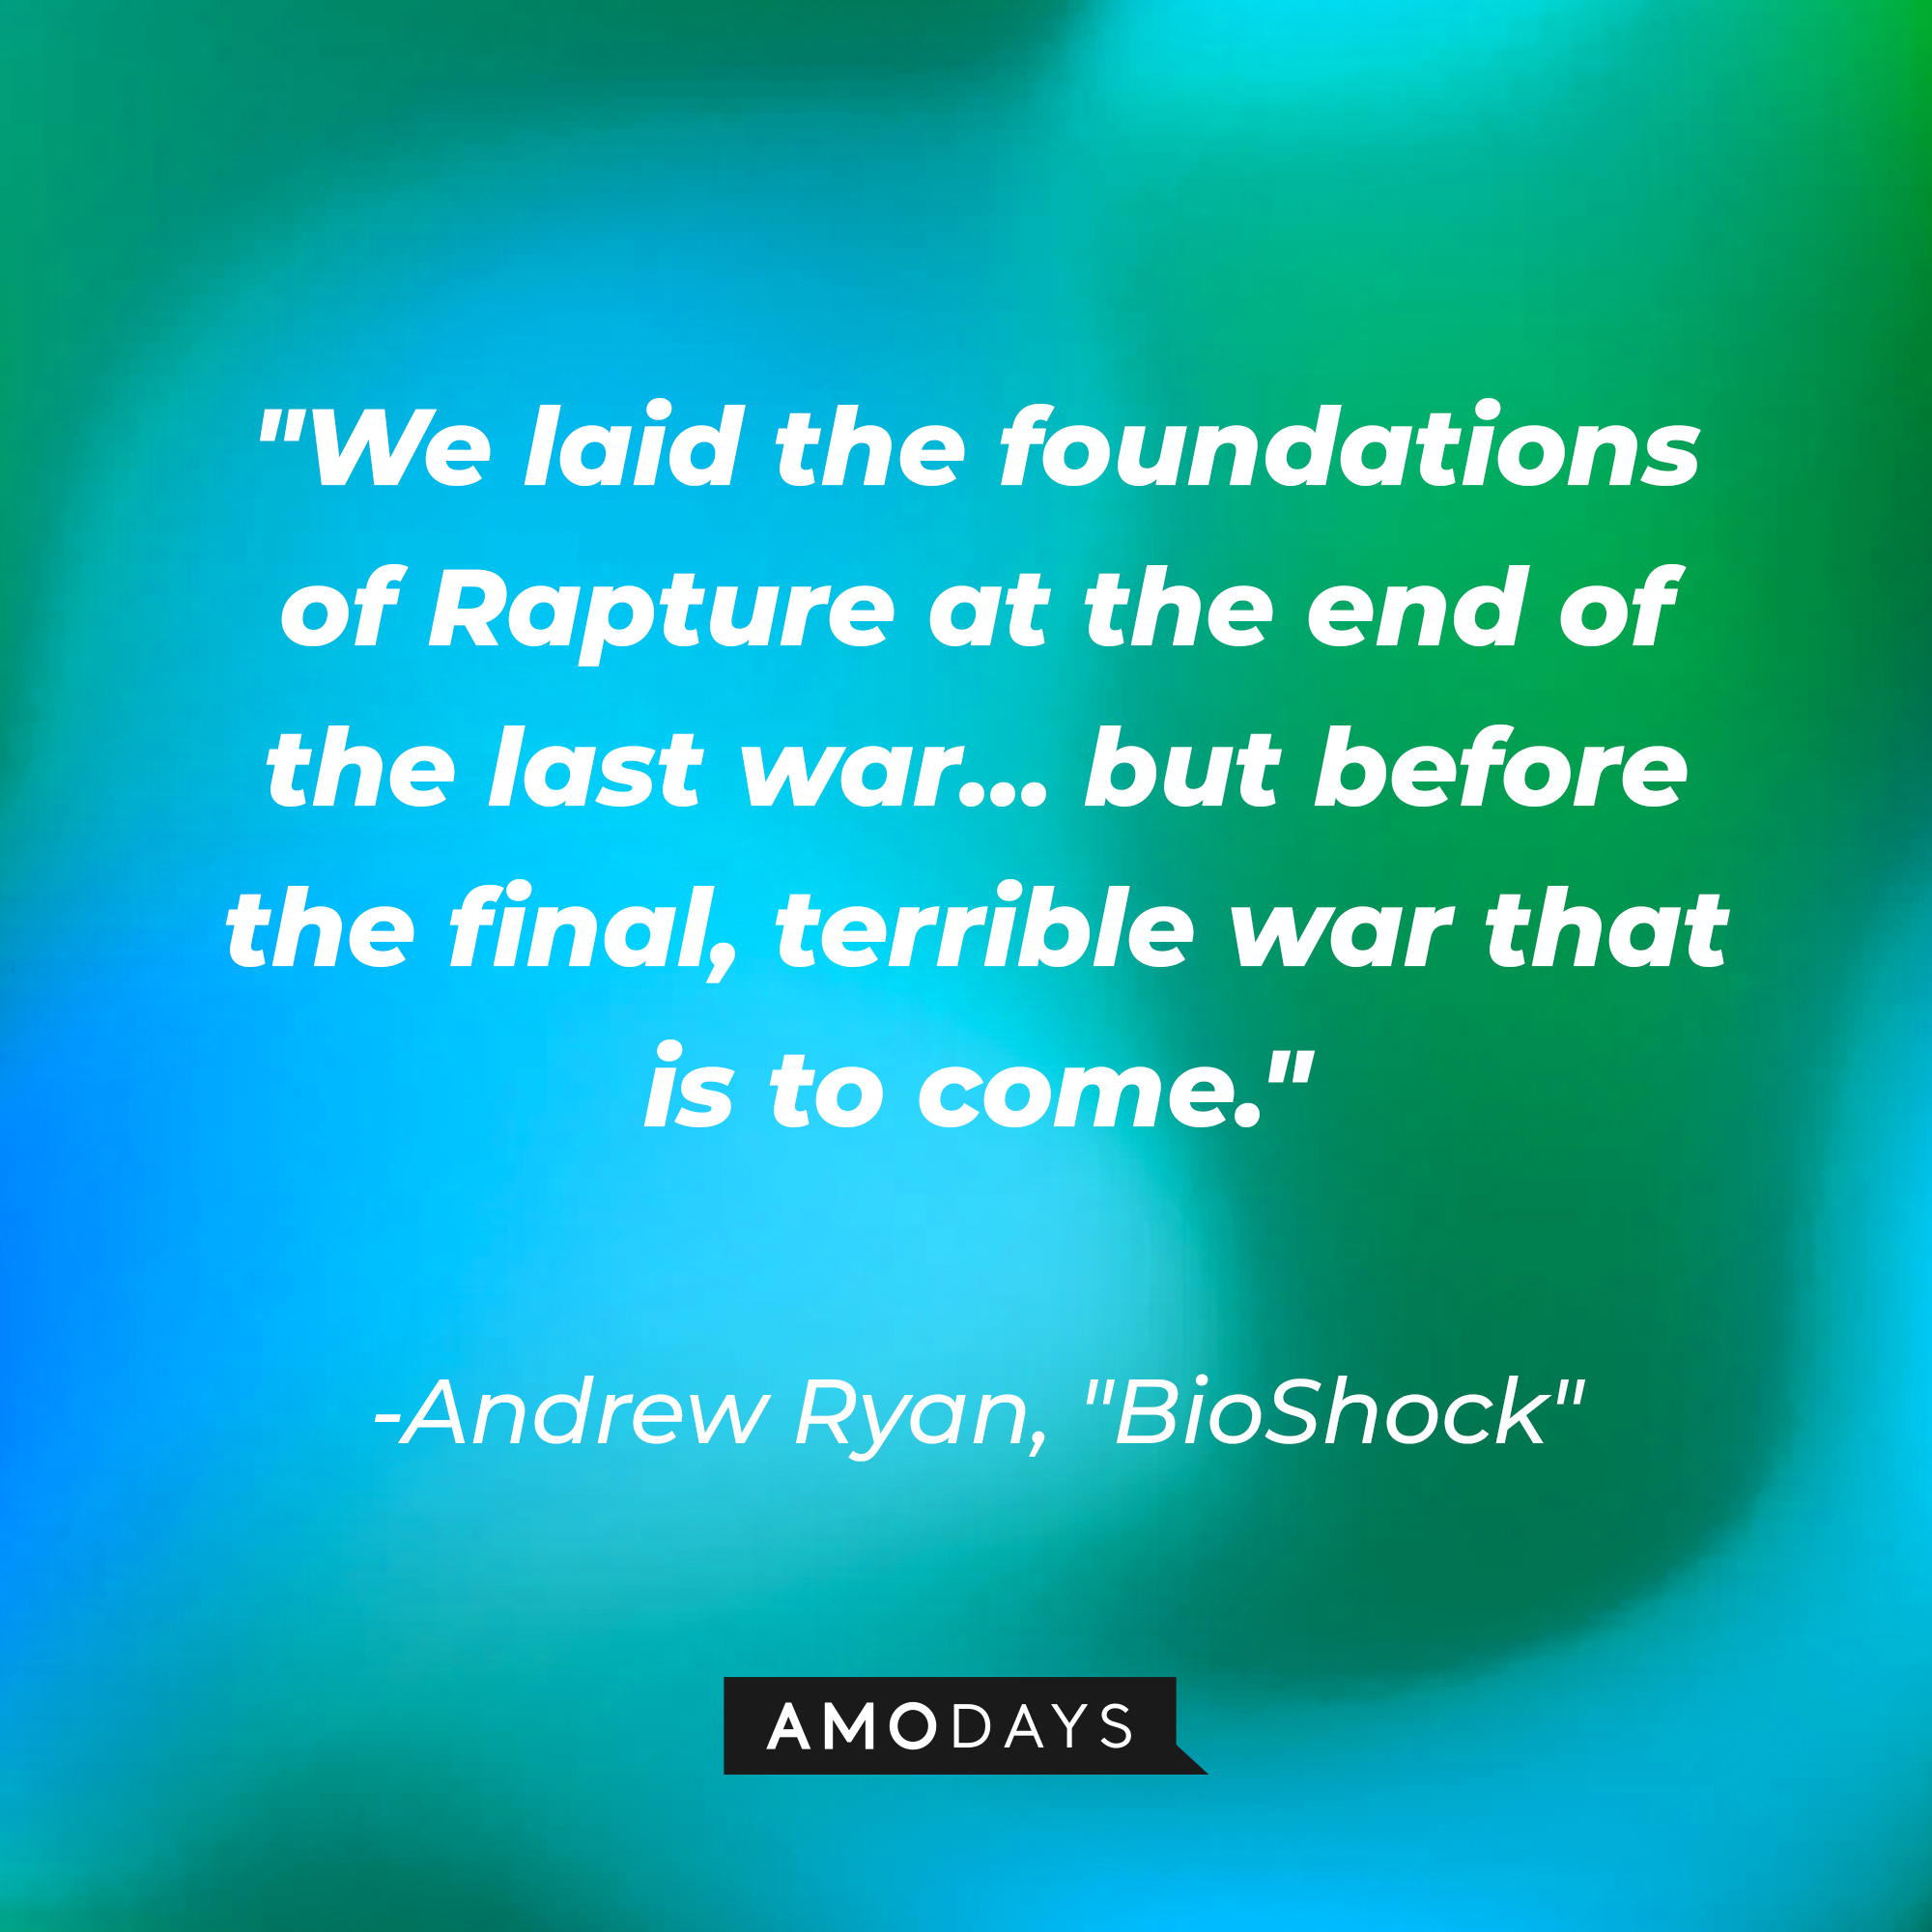 Andrew Ryan's quote from "BioShock:" "We laid the foundations of Rapture at the end of the last war… but before the final, terrible war that is to come." | Source: AmoDays